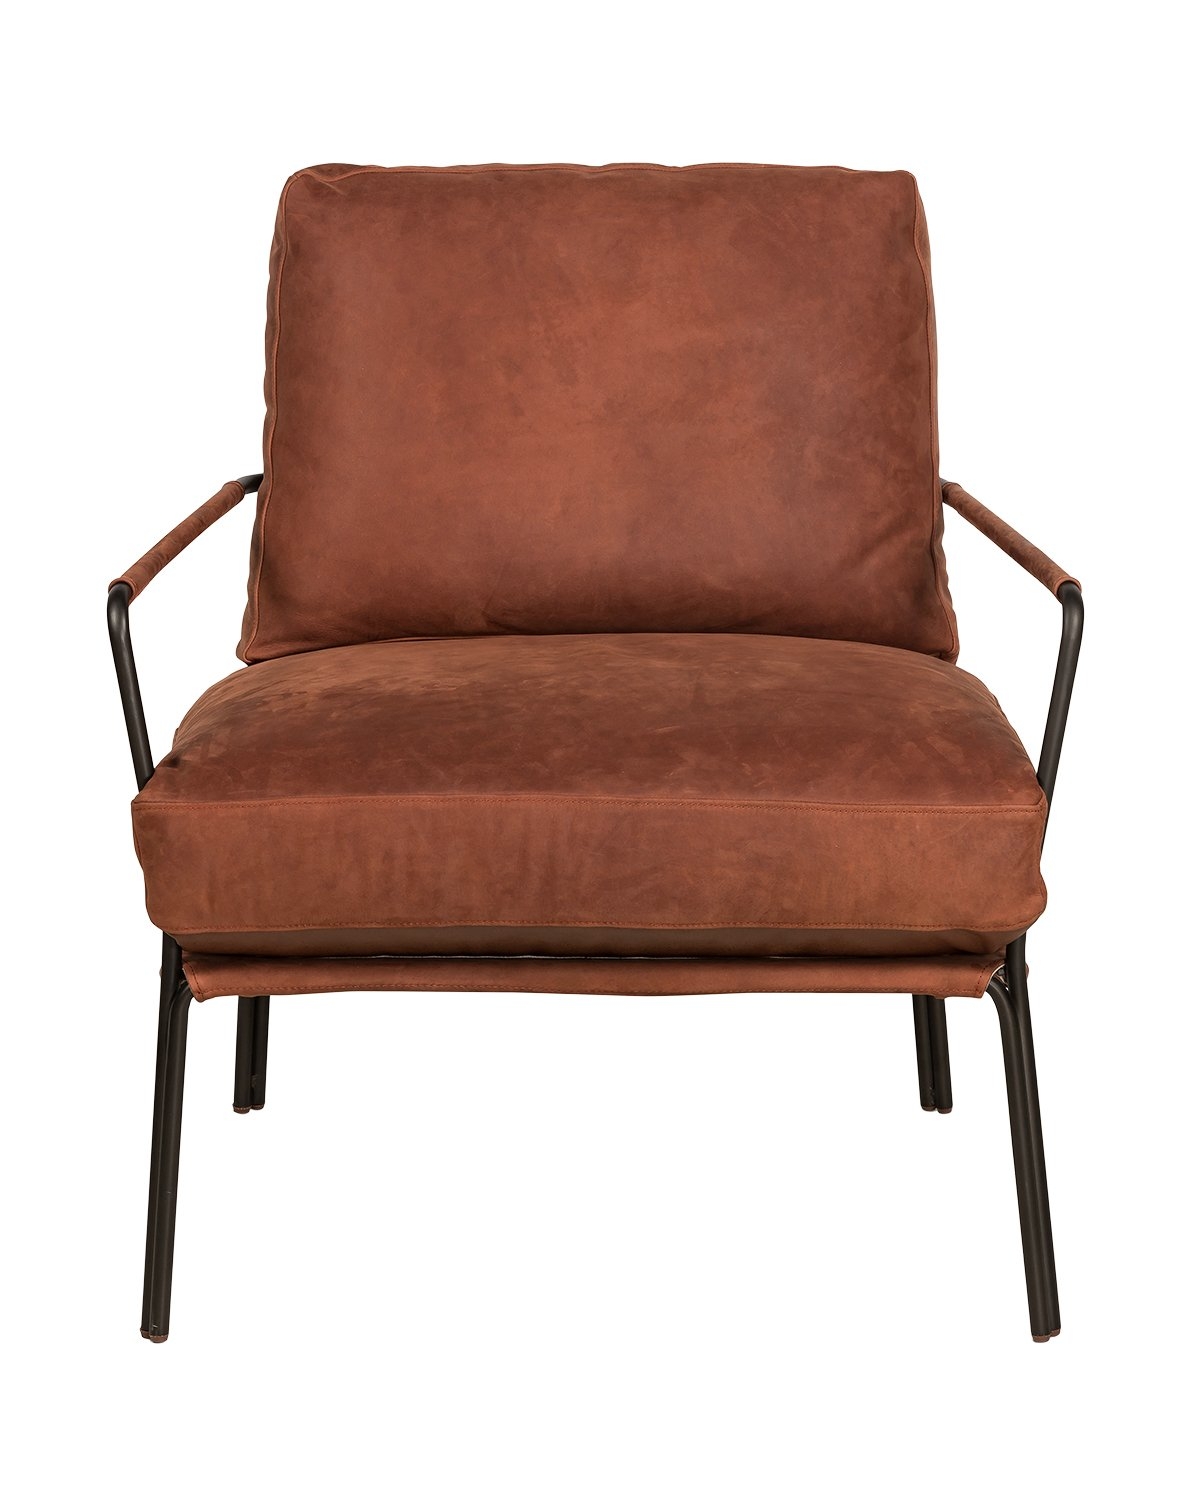 CAMILE CHAIR - BROWN - Image 0